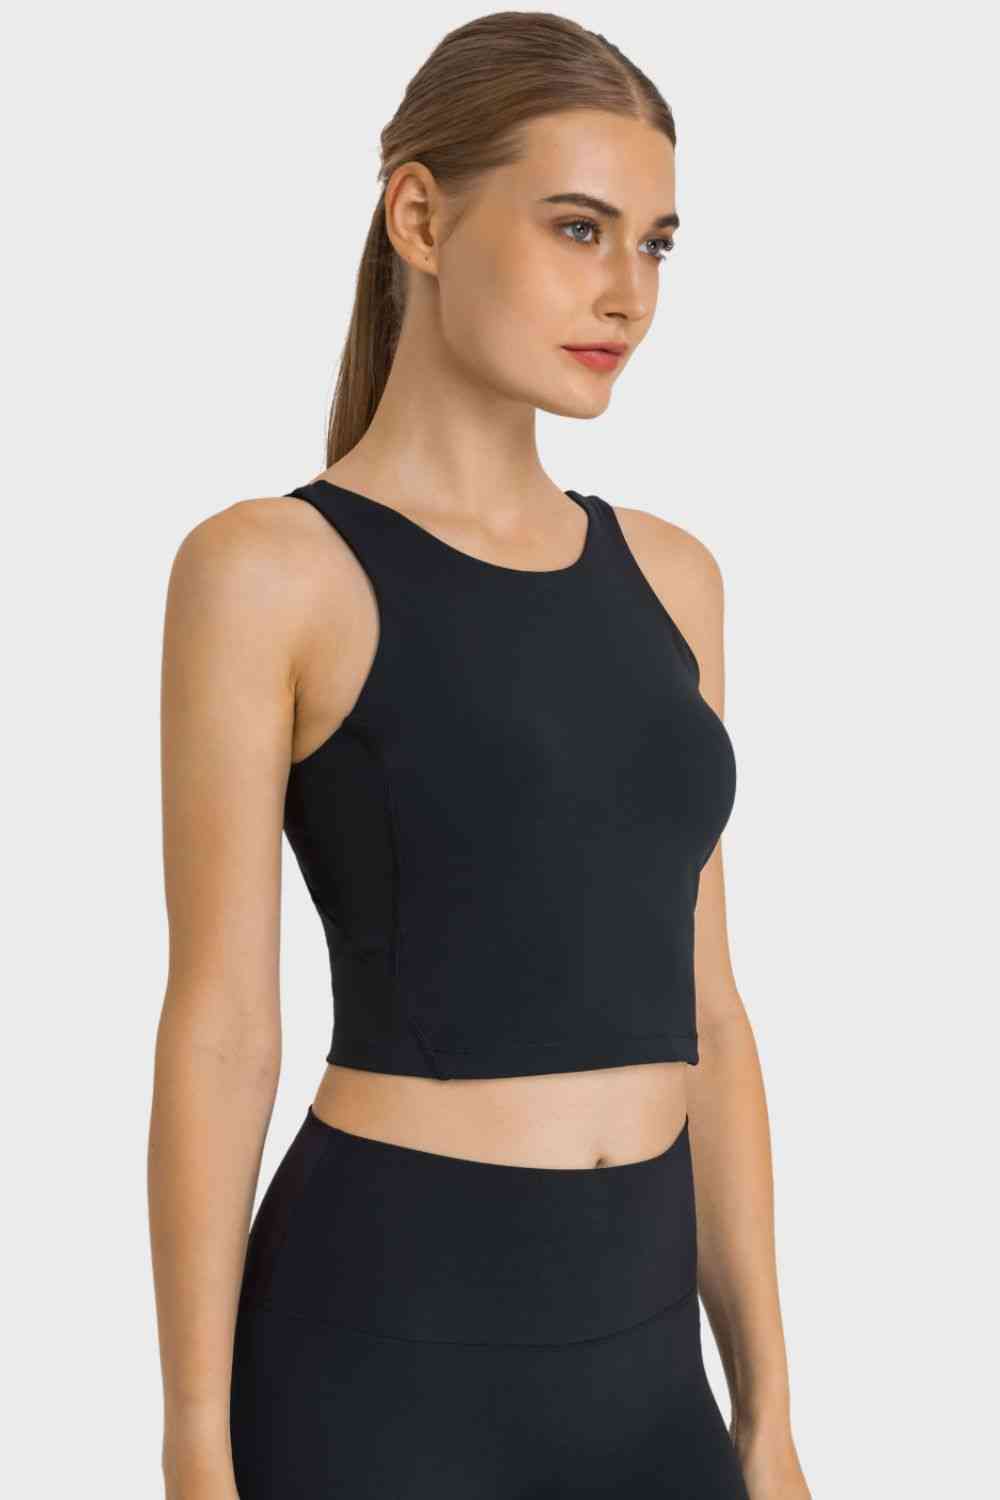 Super Stretch Cropped Active Top